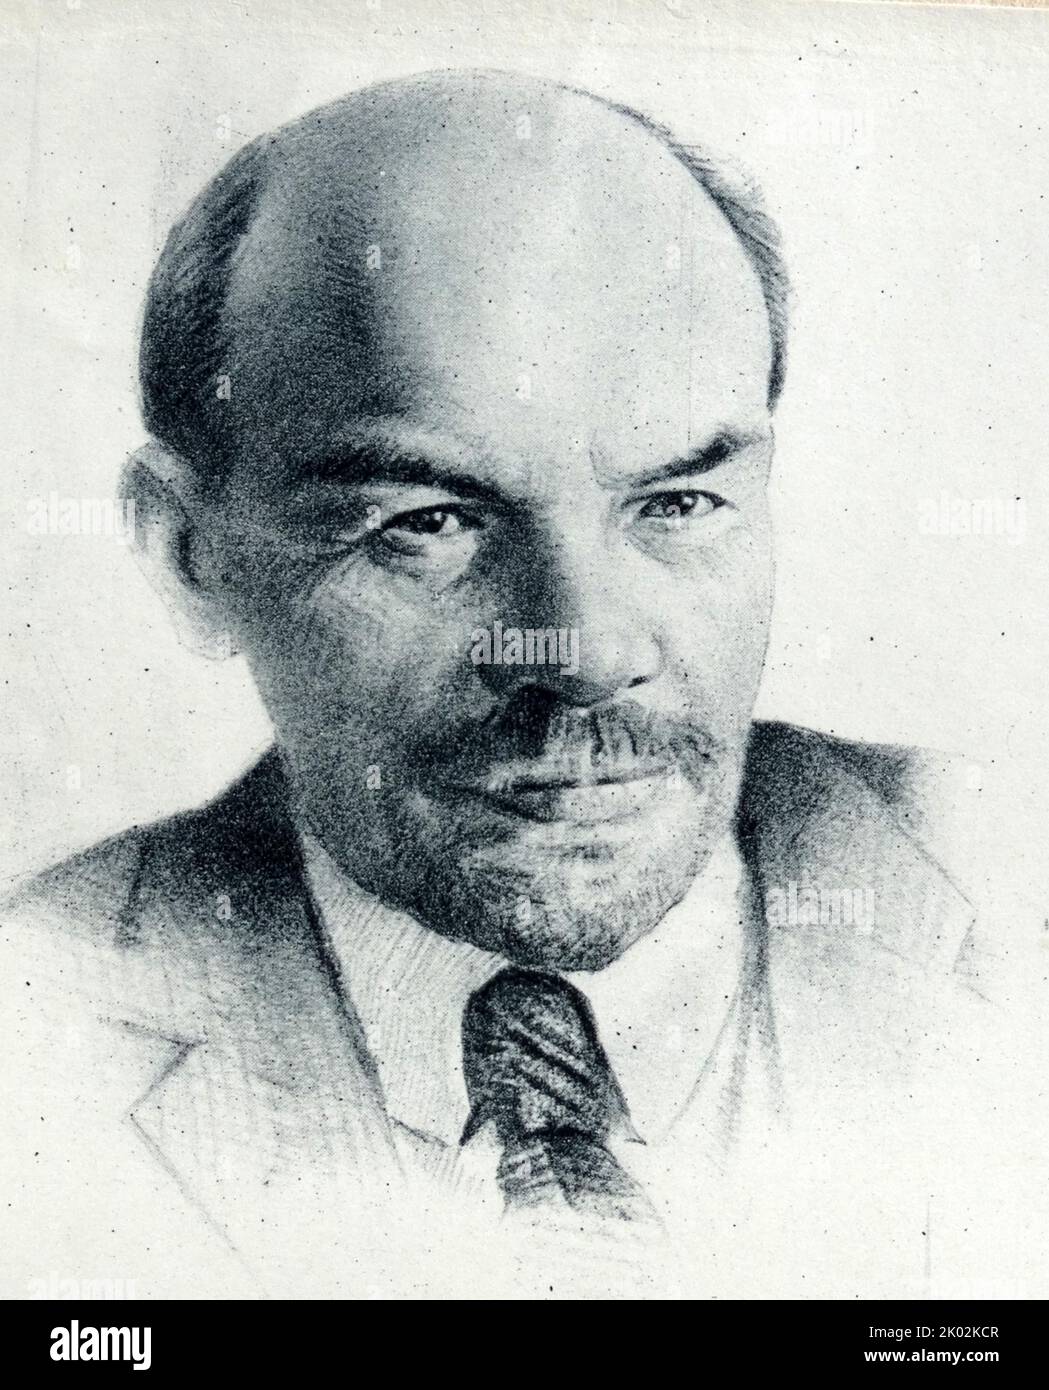 Vladimir Ilyich Ulyanov (1870 - 1924), known by his alias Lenin, was a Russian revolutionary, politician, and political theorist. He served as head of government of Soviet Russia from 1917 to 1924 and of the Soviet Union from 1922 to 1924 Stock Photo